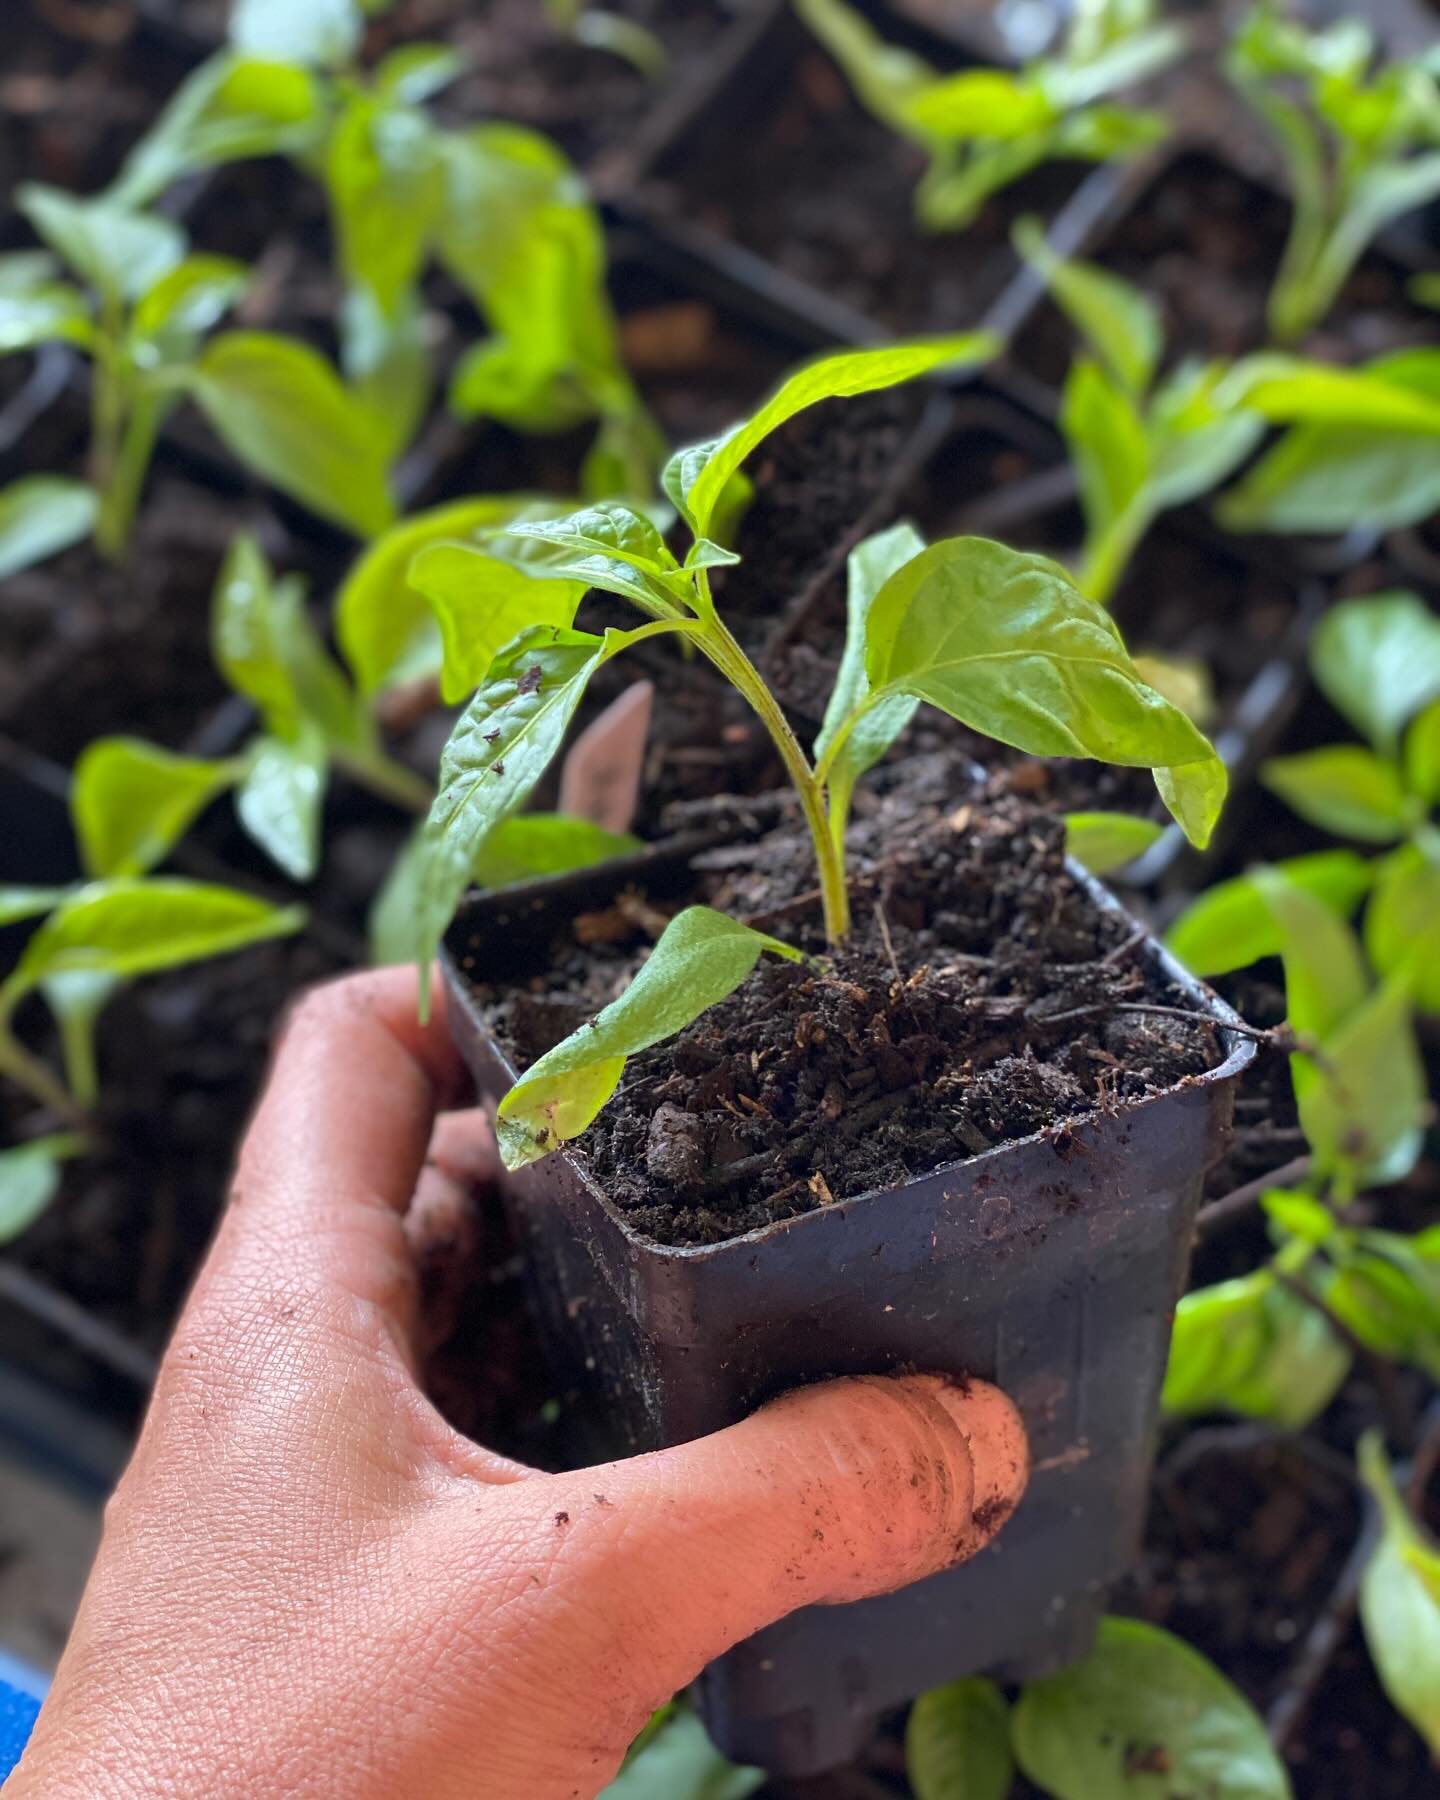 How did you spend your weekend? Our Garden Director Melissa spent it playing with plant babies, potting up hundreds of tomatoes and peppers! Once your plants have a couple sets of true leaves, it&rsquo;s time to give them a little more wiggle room an